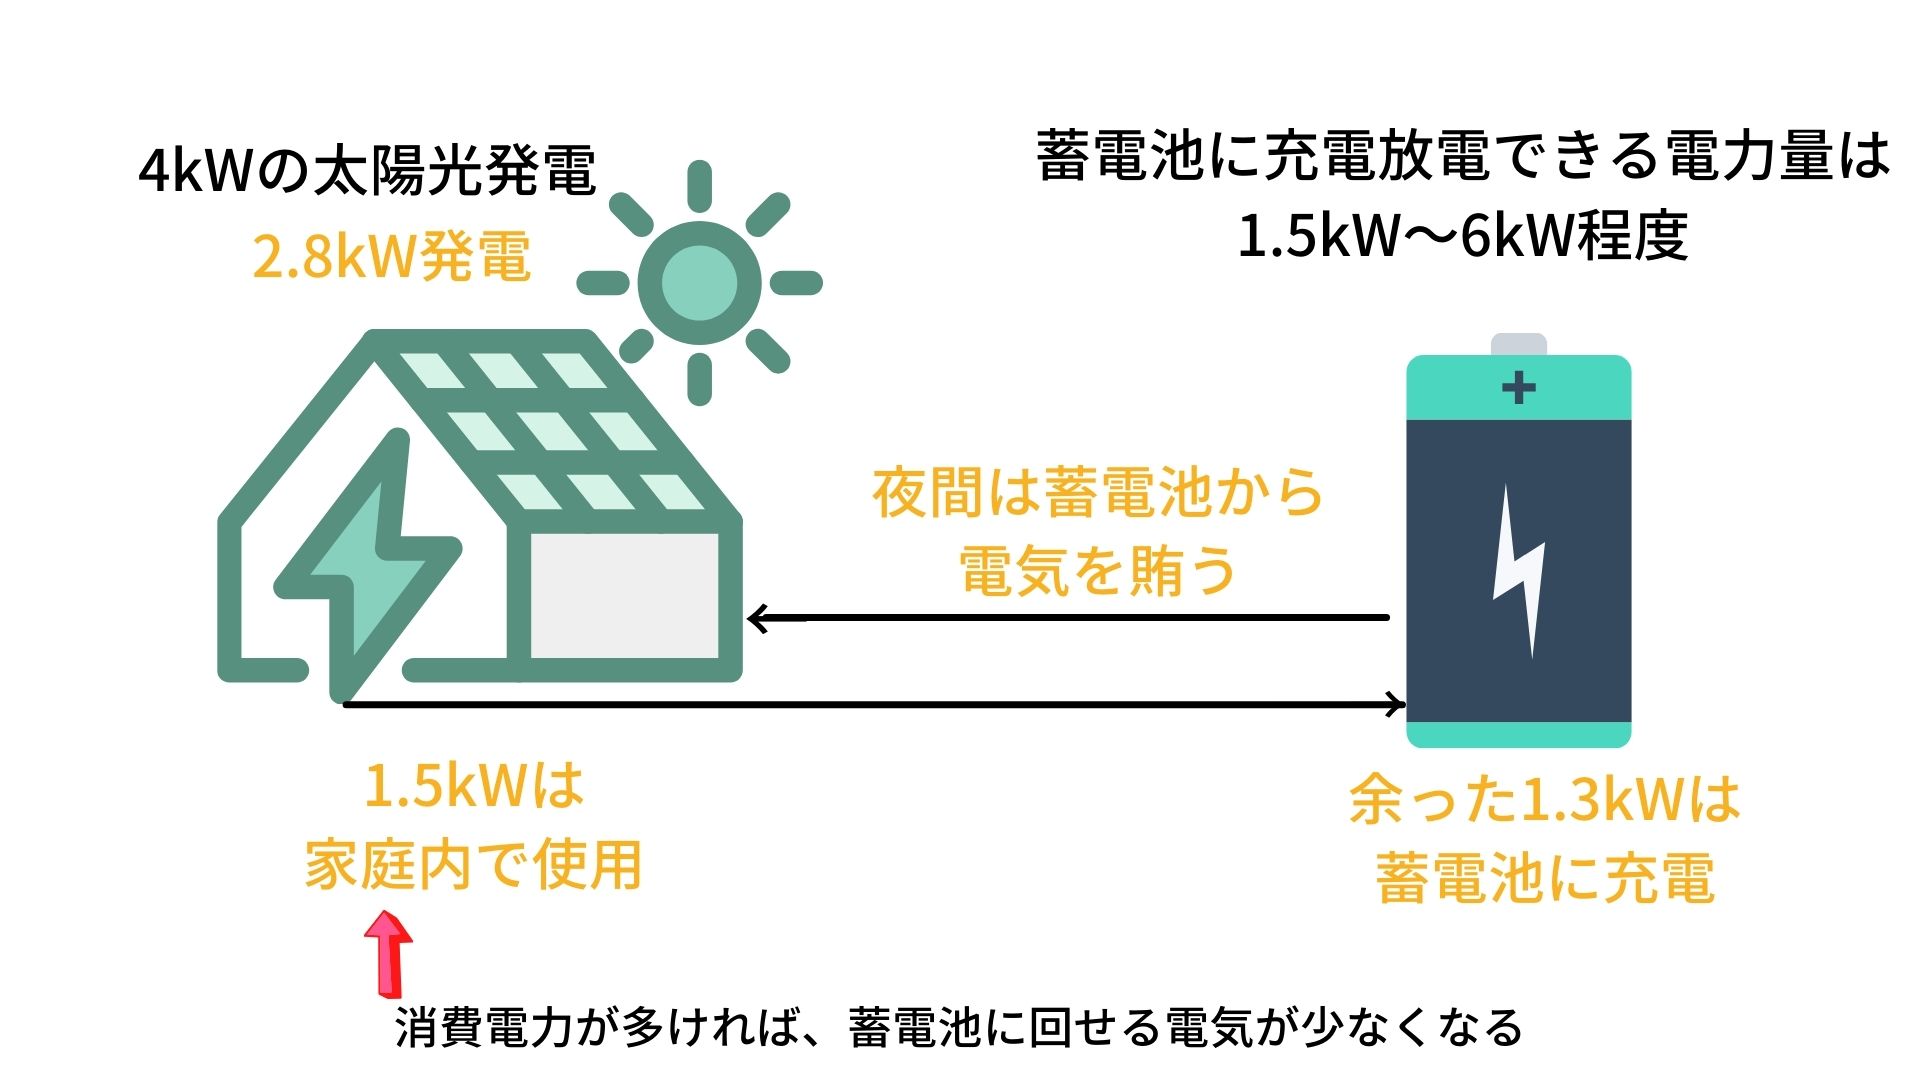 affinity-of-photovoltaic-power-generation-and-the-storage-battery